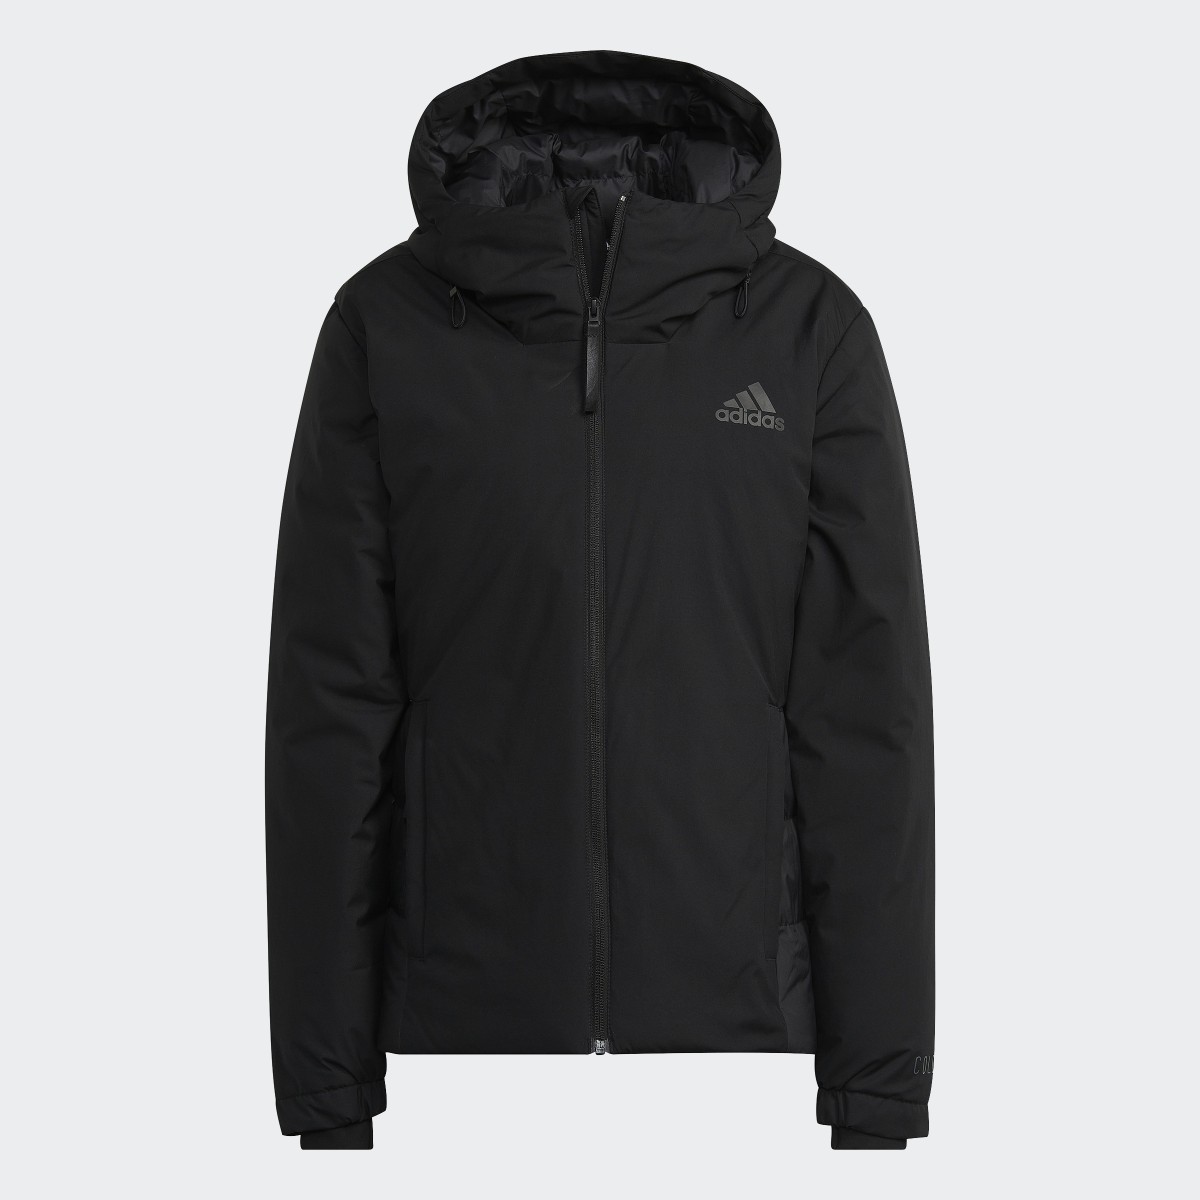 Adidas Traveer COLD.RDY Jacket. 6